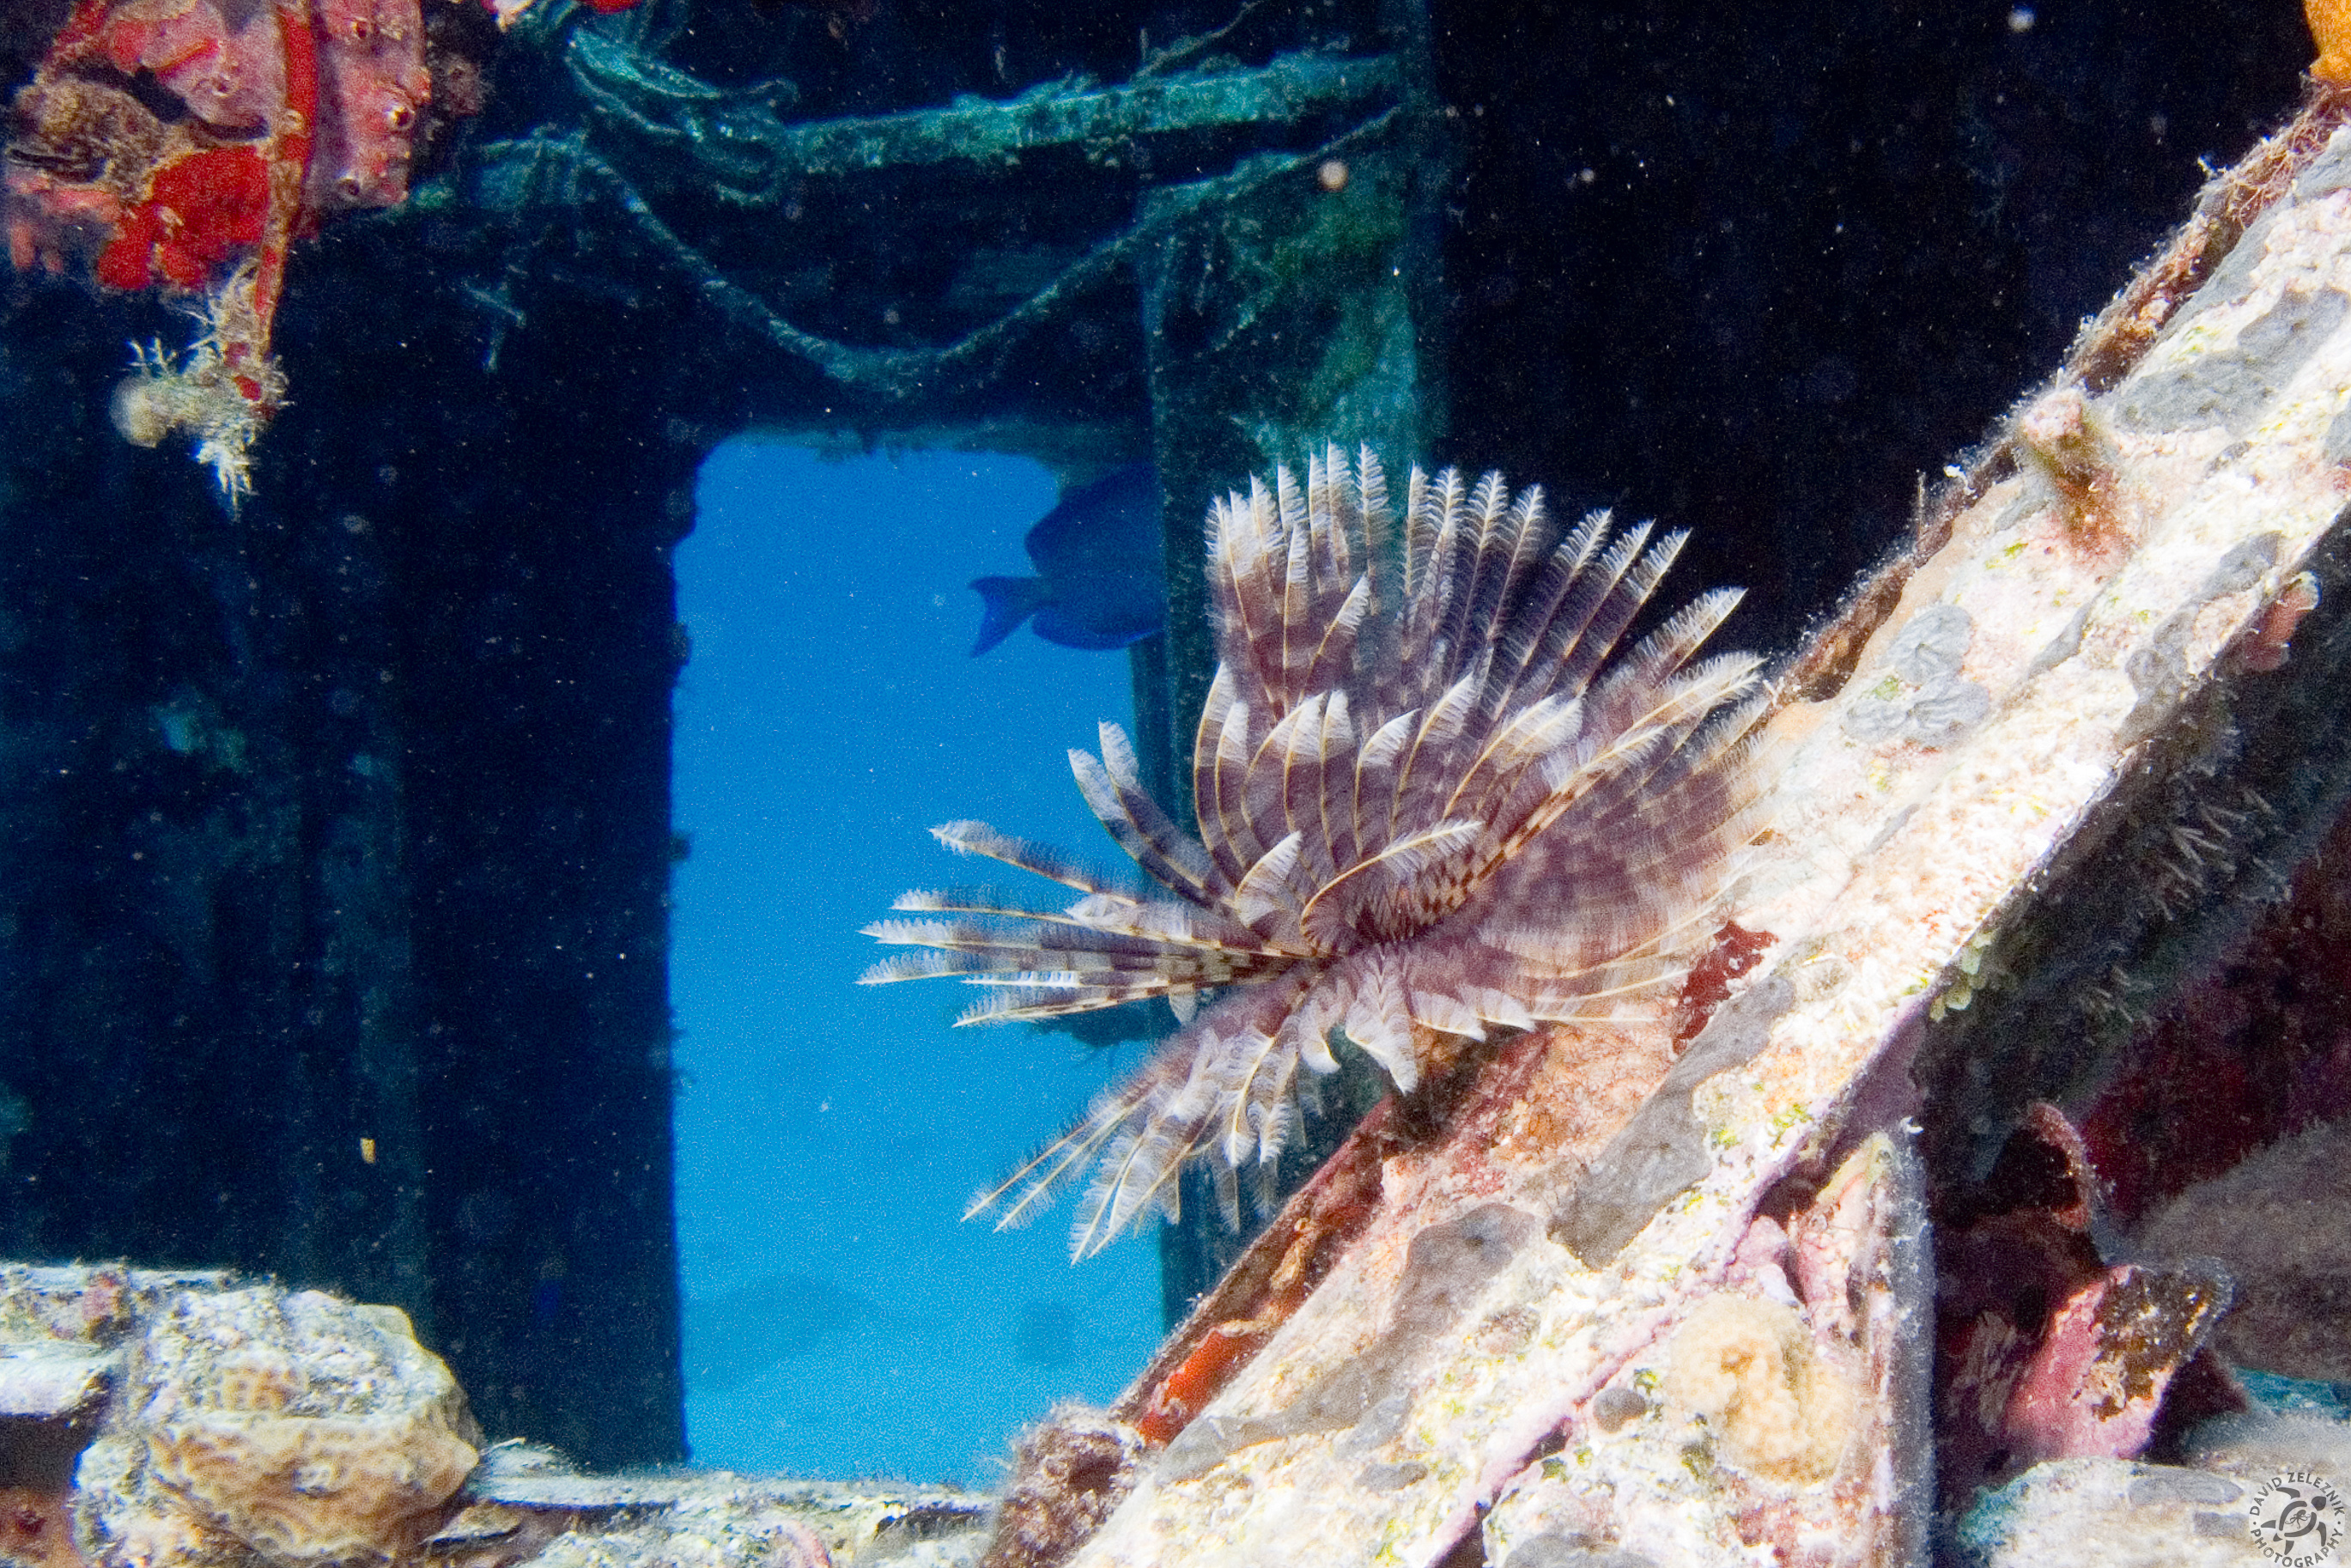 Coral Gardens, off of Great Dog Island contains lots of coral heads and the remains of a plane fuselage. The plane wrecked at the end of the Tortola runway, was sunk intentionally, and used at one point as a movie prop. Here is a giant feather duster worm on the fuselage.